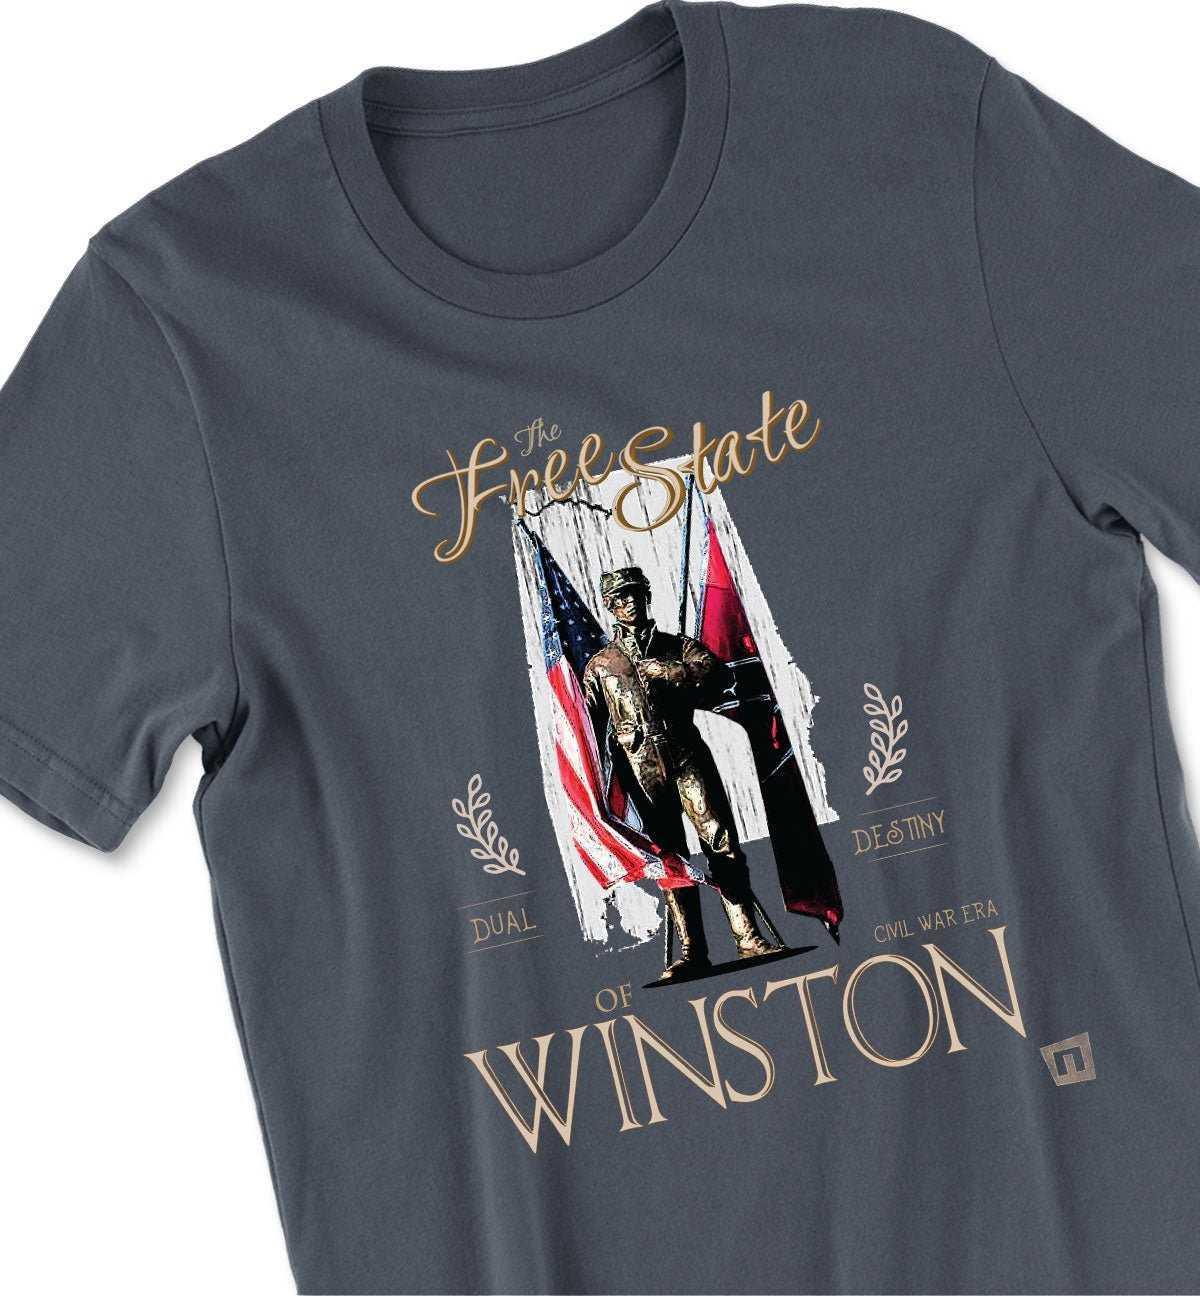 Free State of Winston 'Soldier Statue' - Smith Lake Tshirt - NOGGINHED